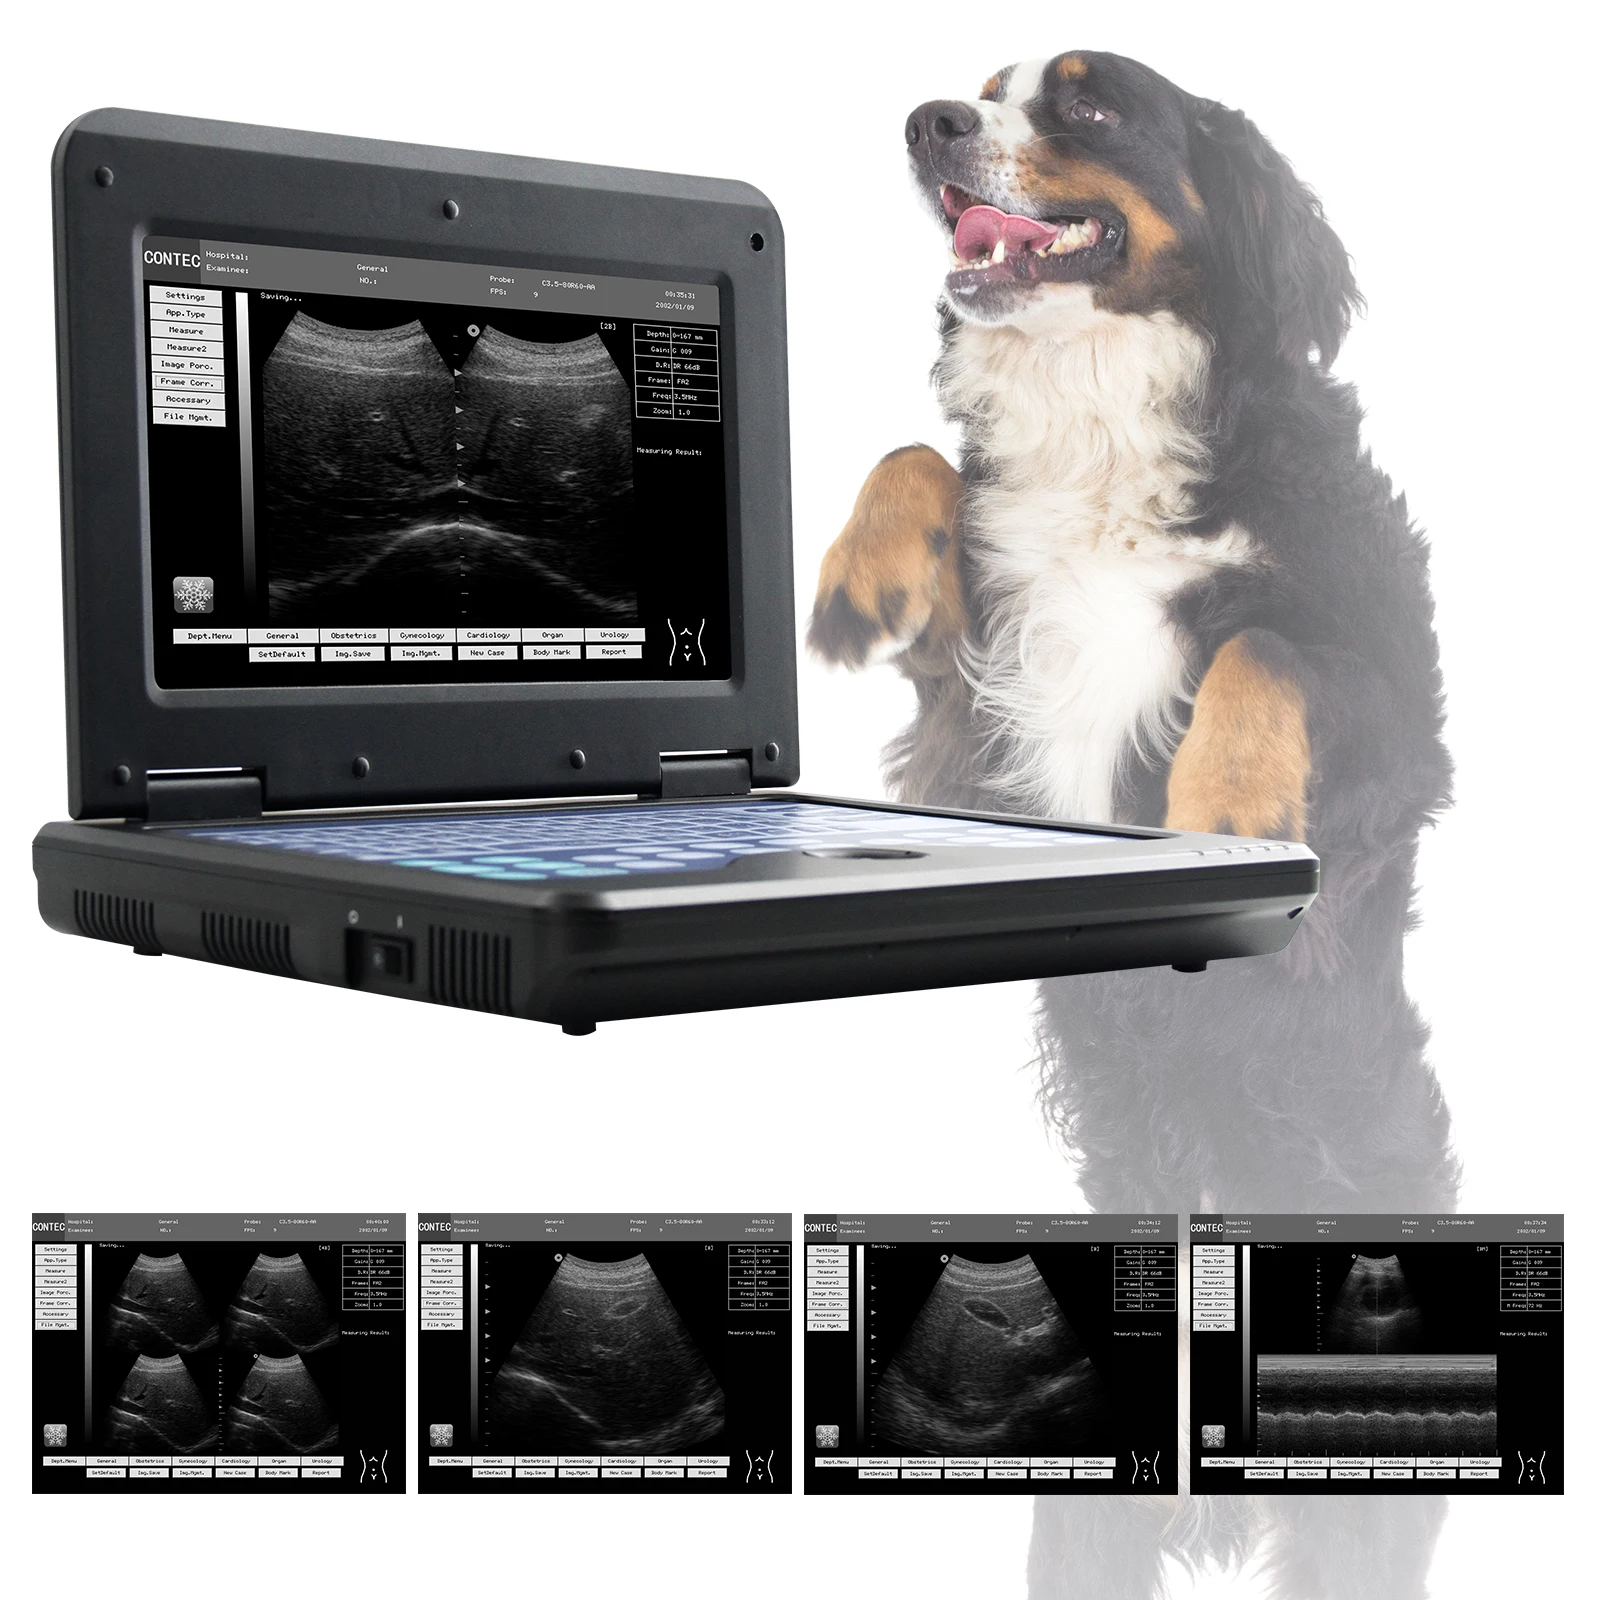 

CONTEC CMS600P2-VET Veterinary ultrasound scanner laptop machine ultrasonic diagnostic systems with 3.5Mhz Convex probe